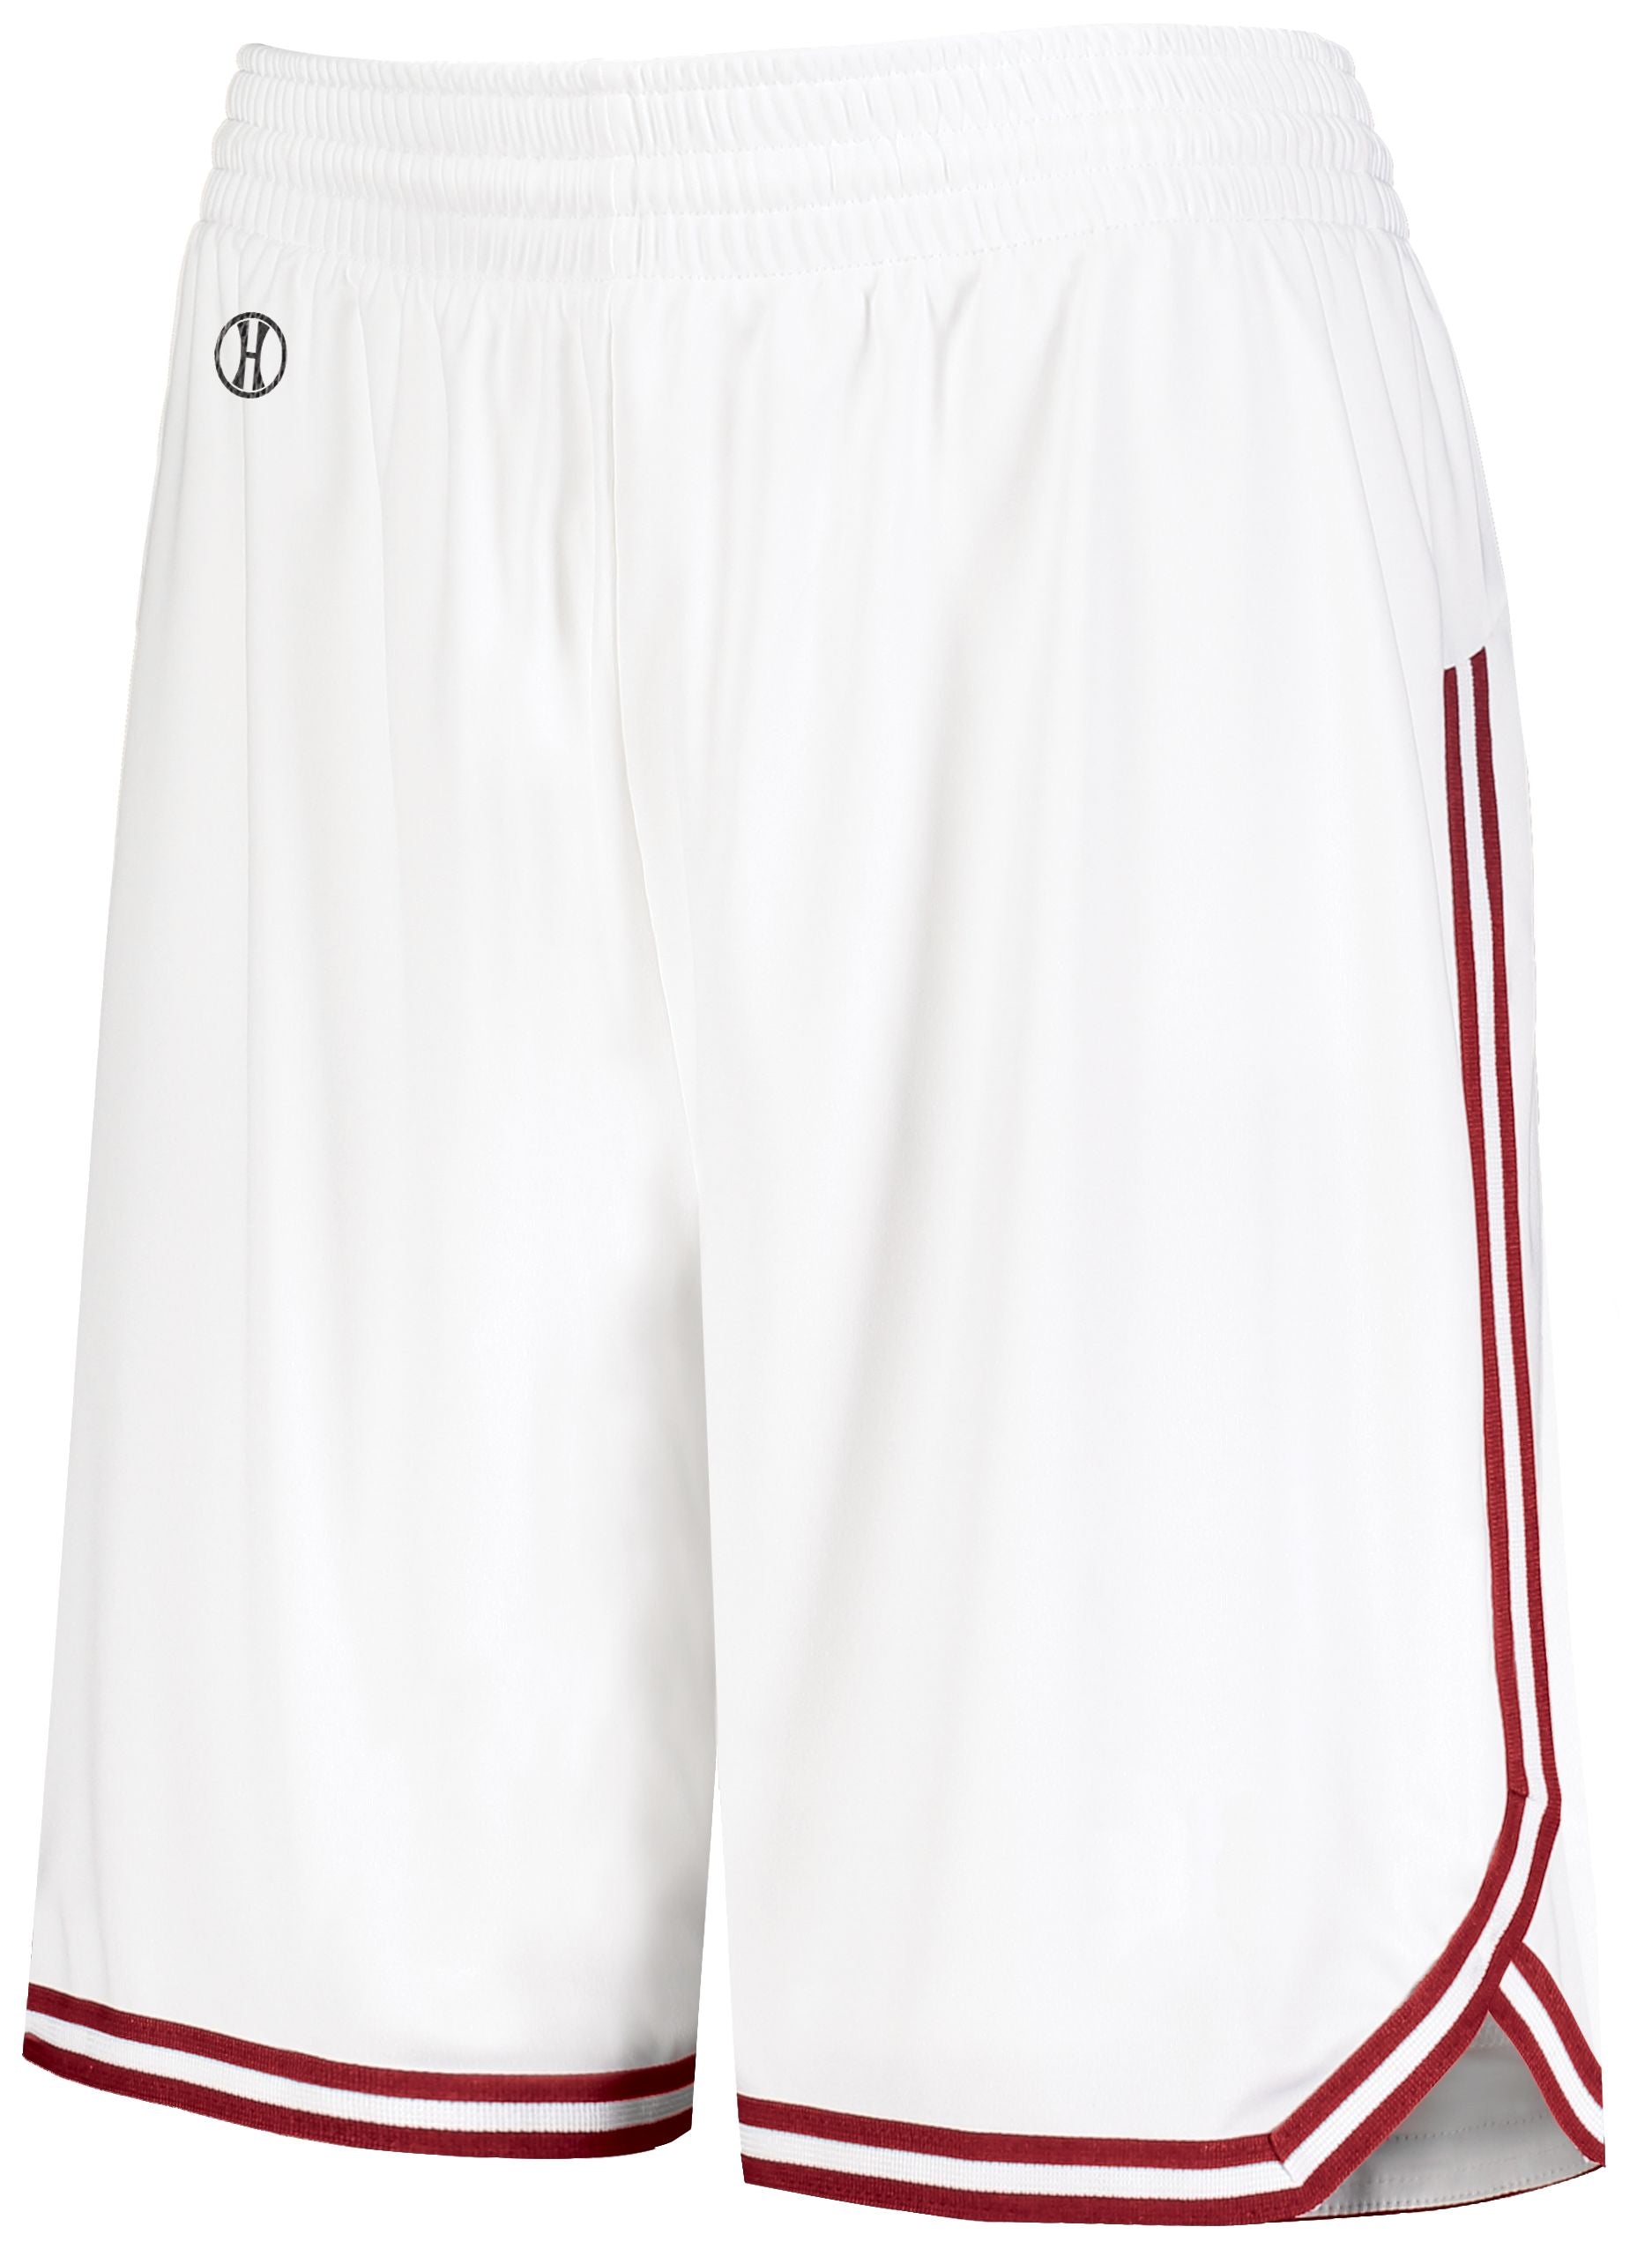 Holloway Ladies Retro Basketball Shorts in White/Scarlet  -Part of the Ladies, Ladies-Shorts, Basketball, Holloway, All-Sports, All-Sports-1 product lines at KanaleyCreations.com